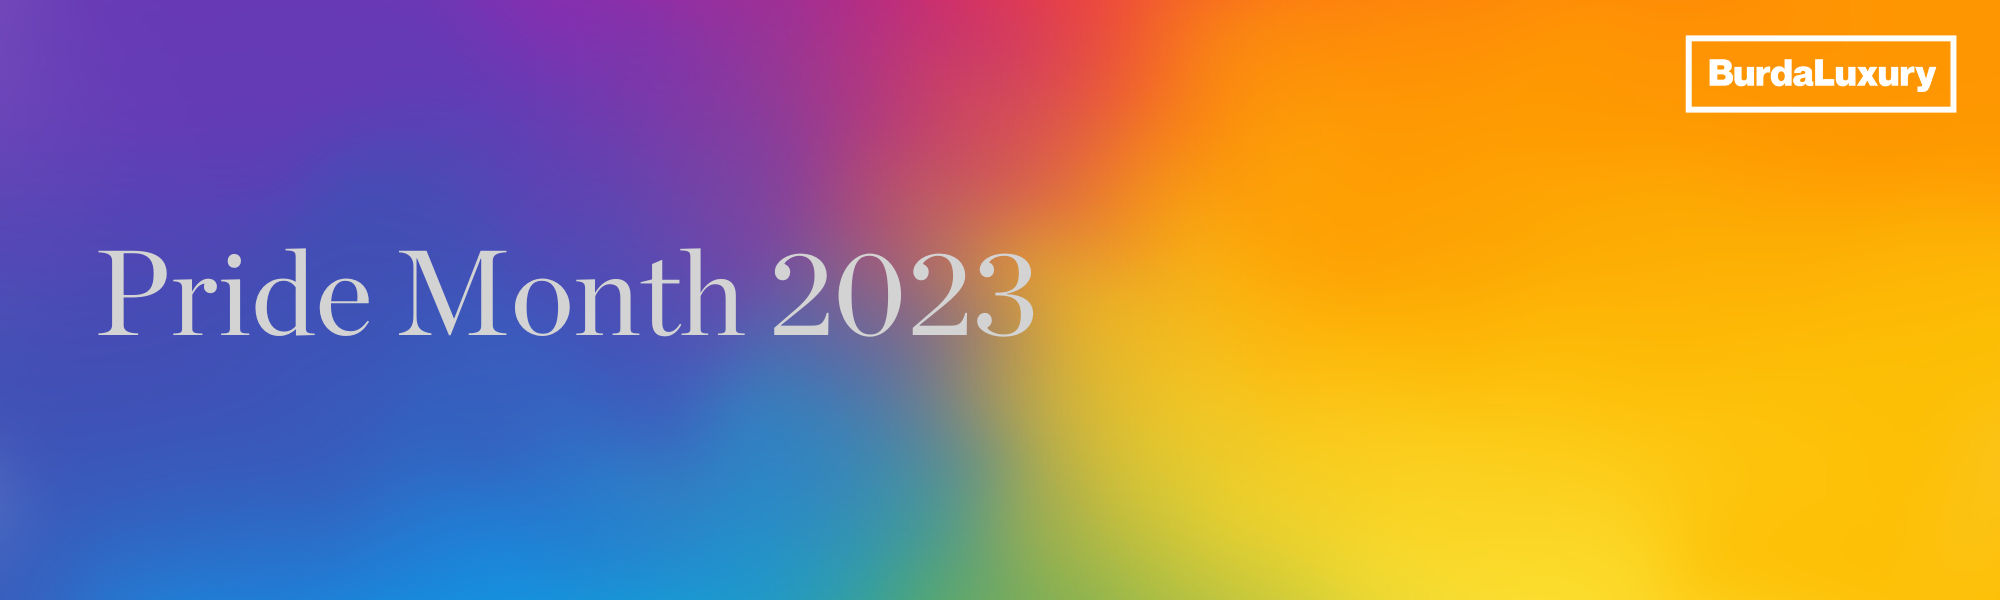 Pride Month 2023 Feature Banner